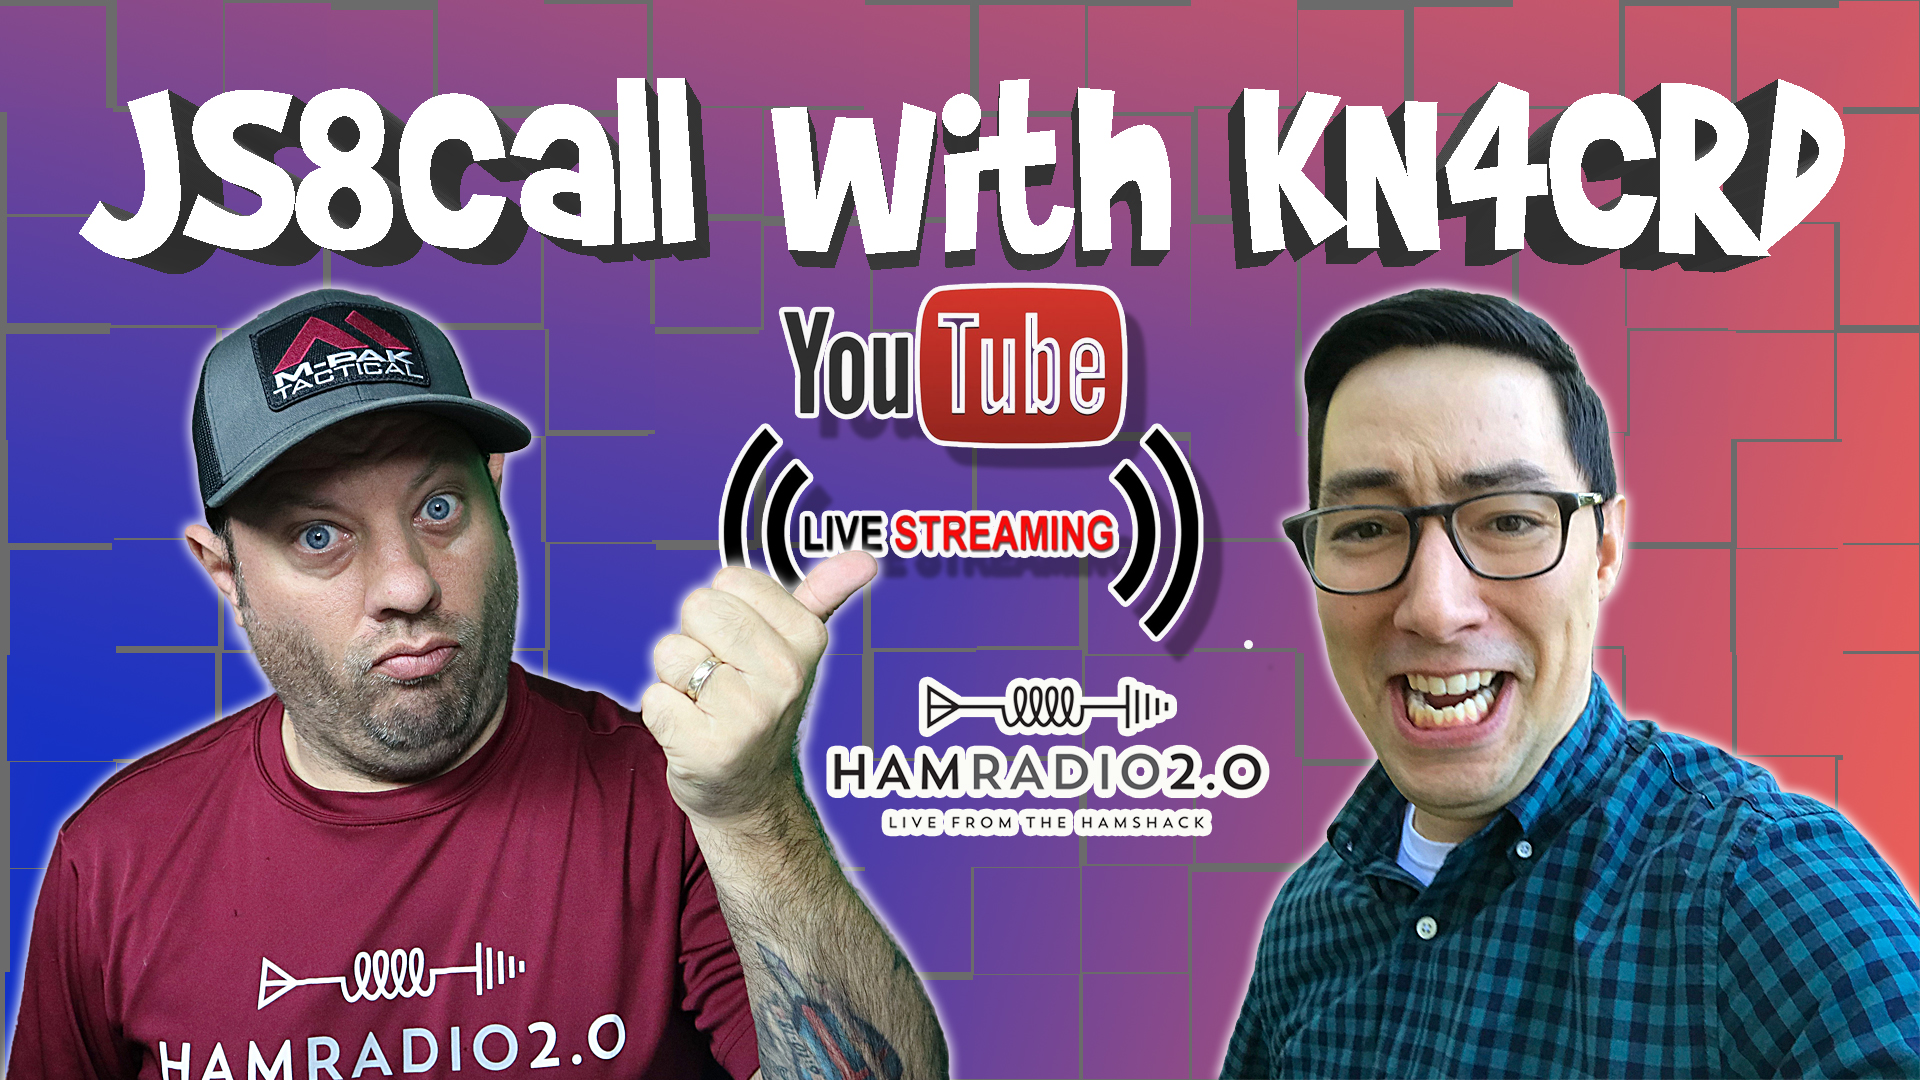 Episode 409: Getting Started with JS8Call! – LIVESTREAM with Jordan, KN4CRD